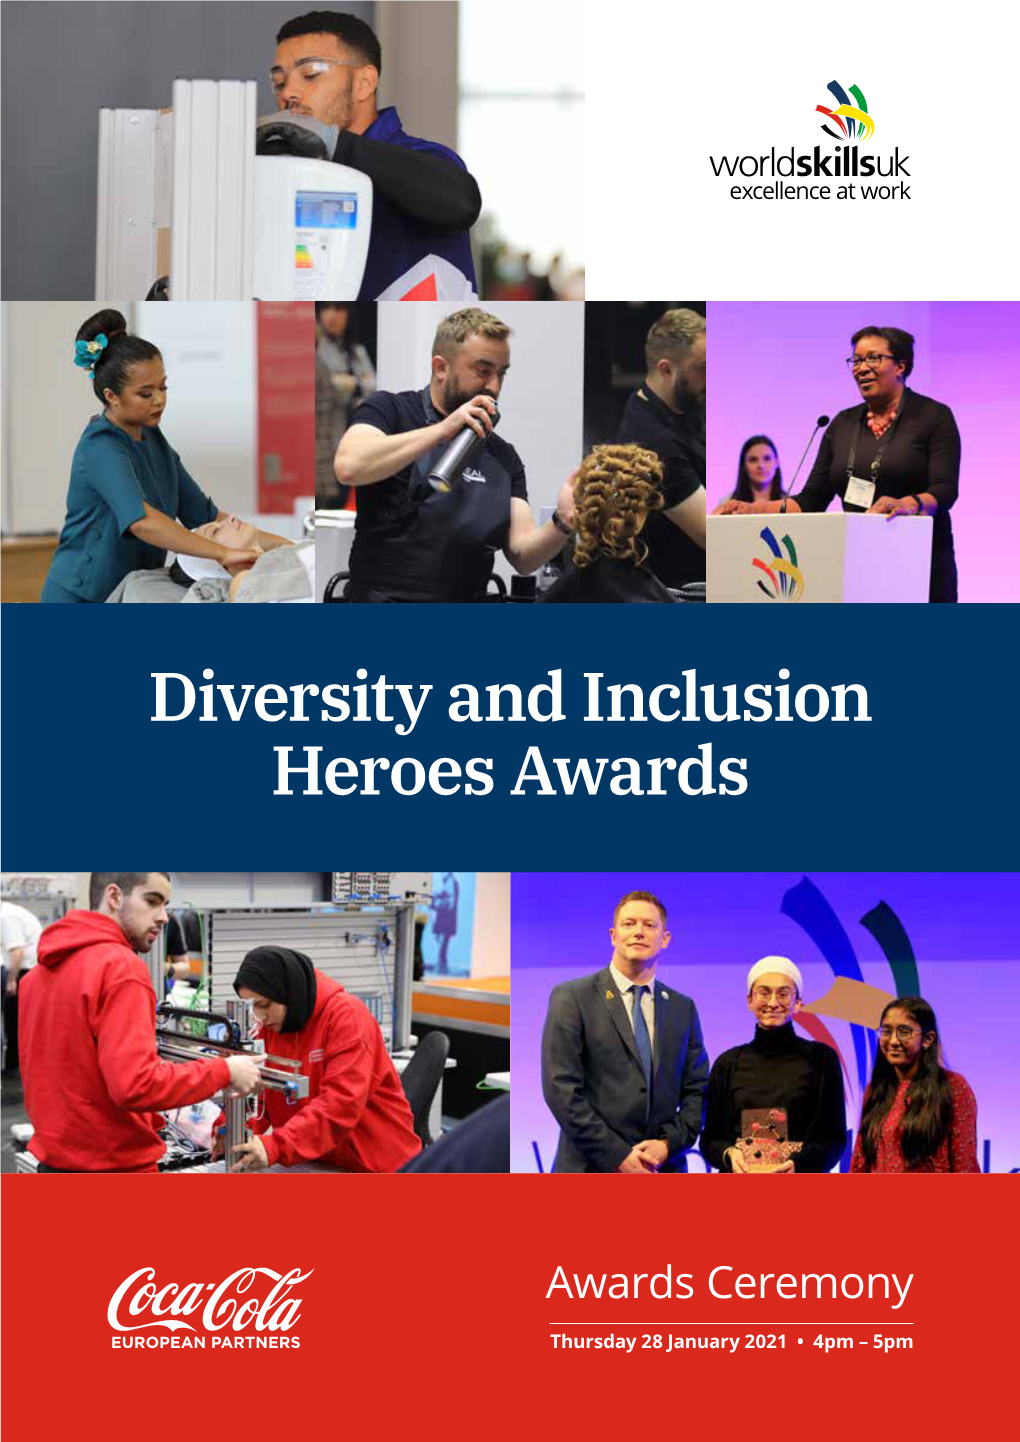 Diversity and Inclusion Heroes Awards